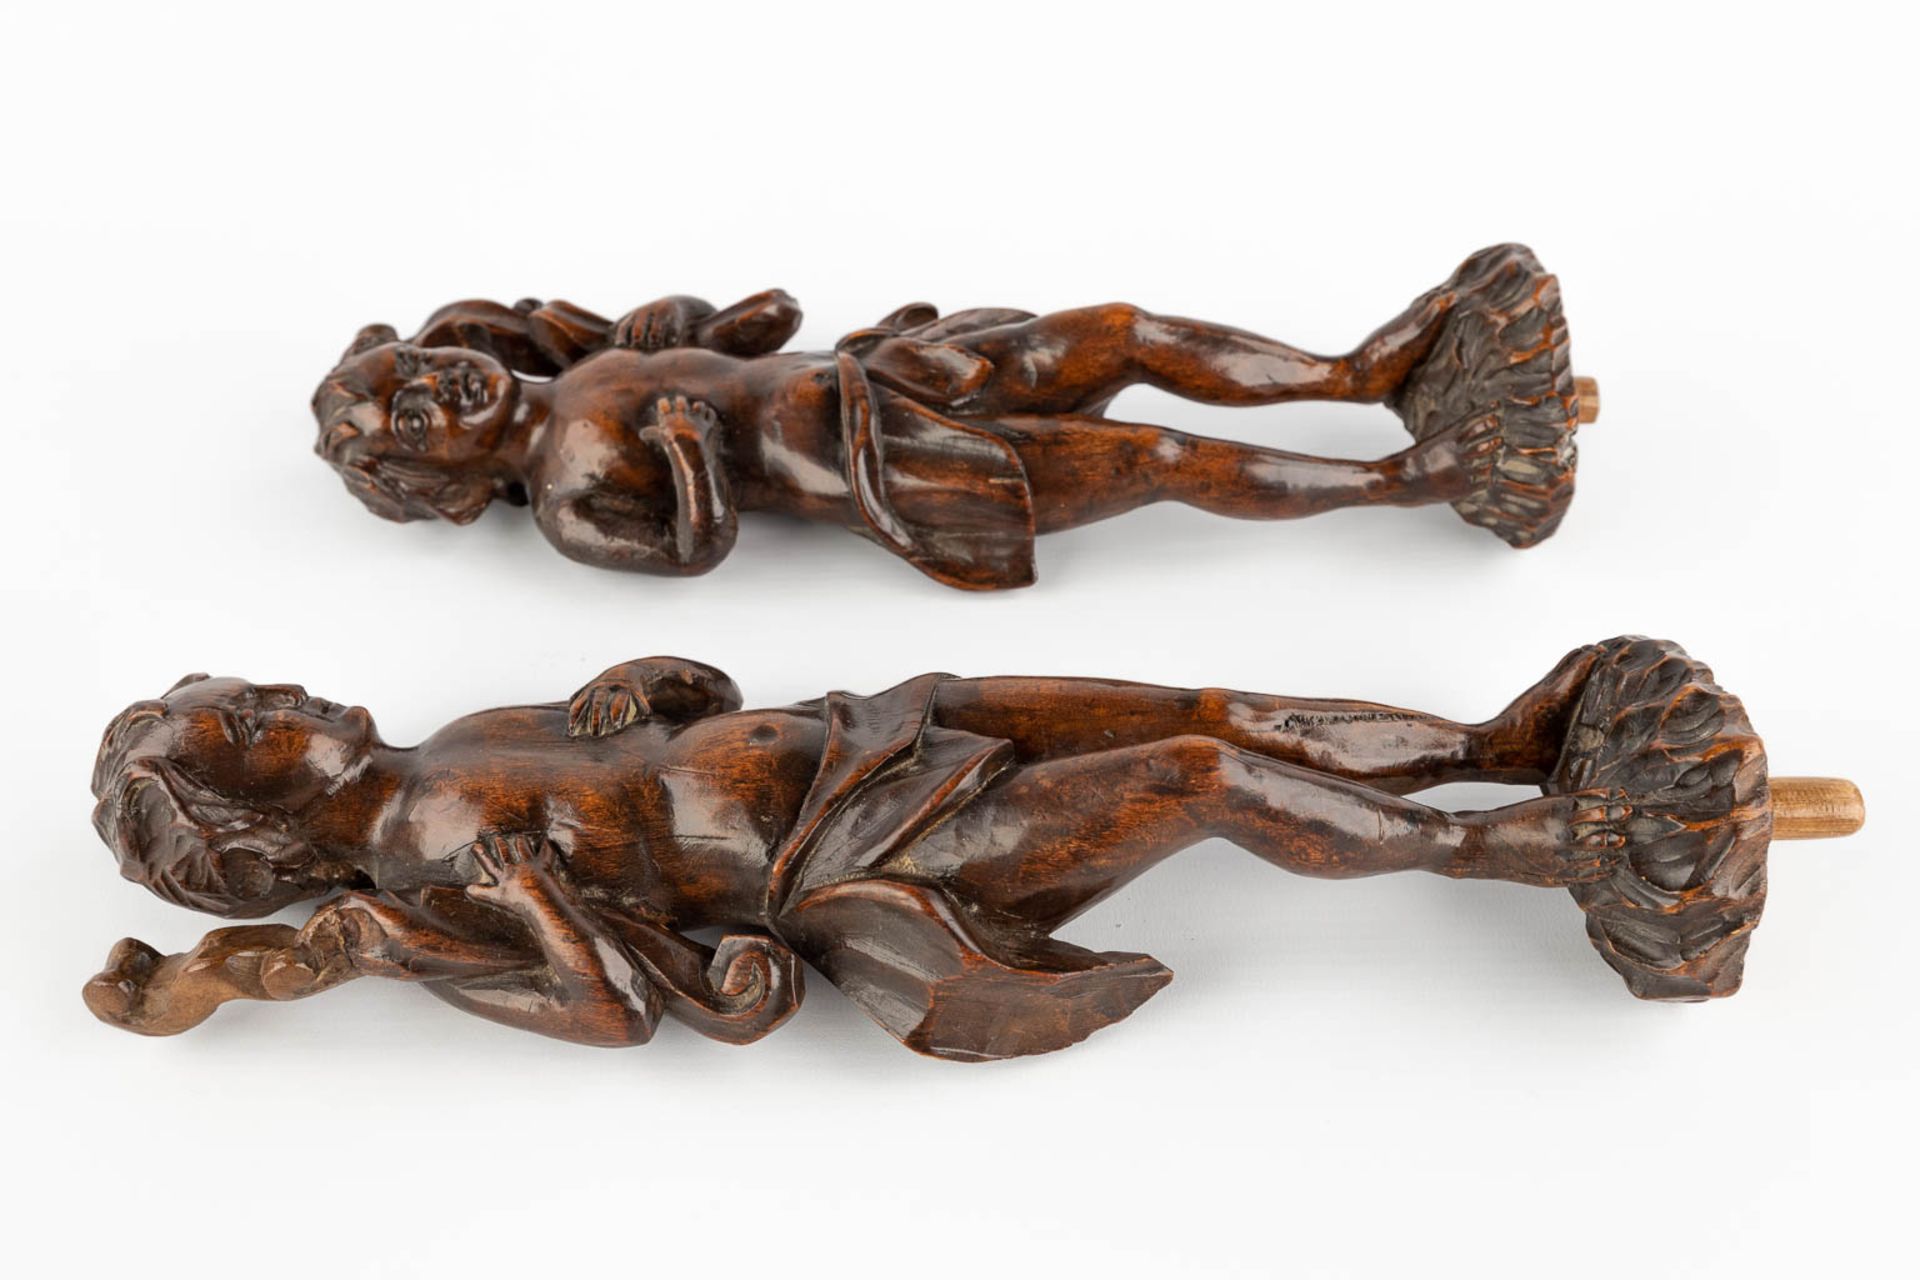 A pair of wood-sculptured figurines of young men, 18th C. (H:34 cm) - Image 4 of 10